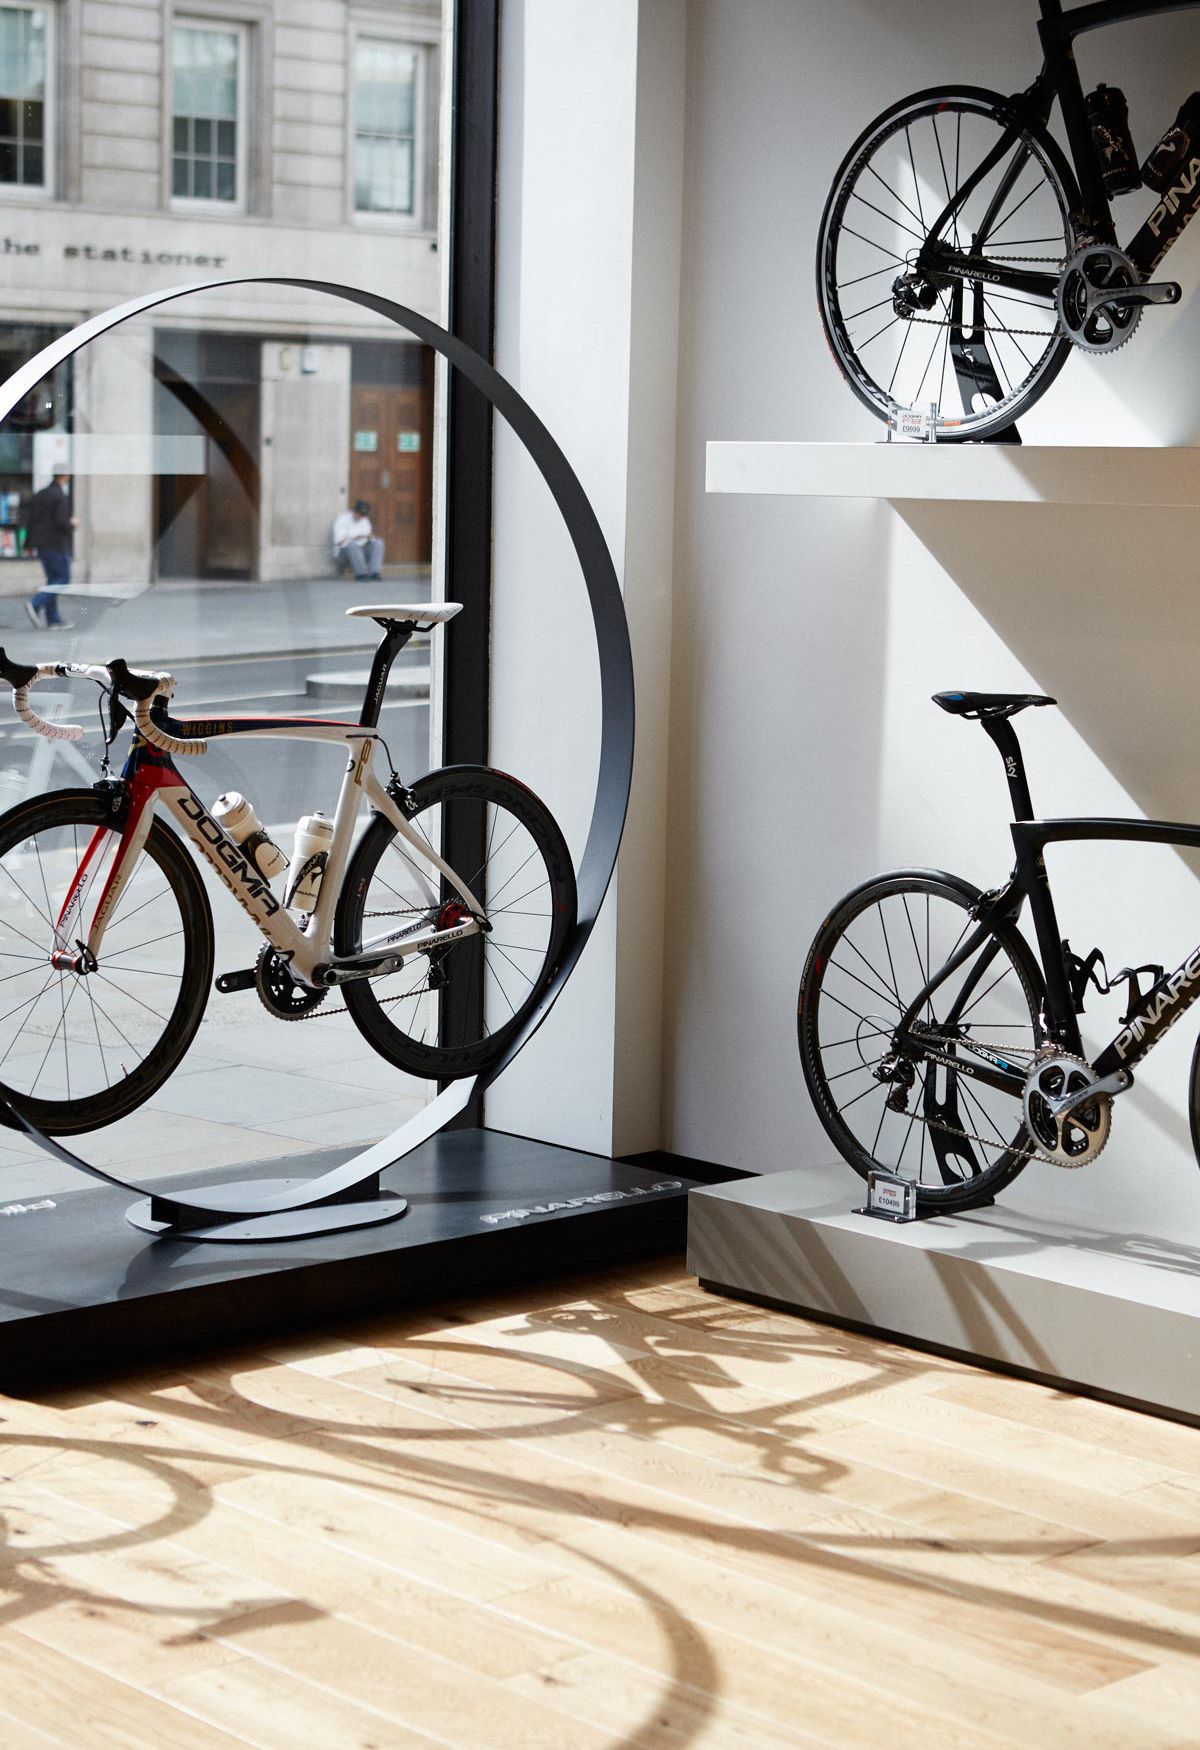 The Bike Rooms